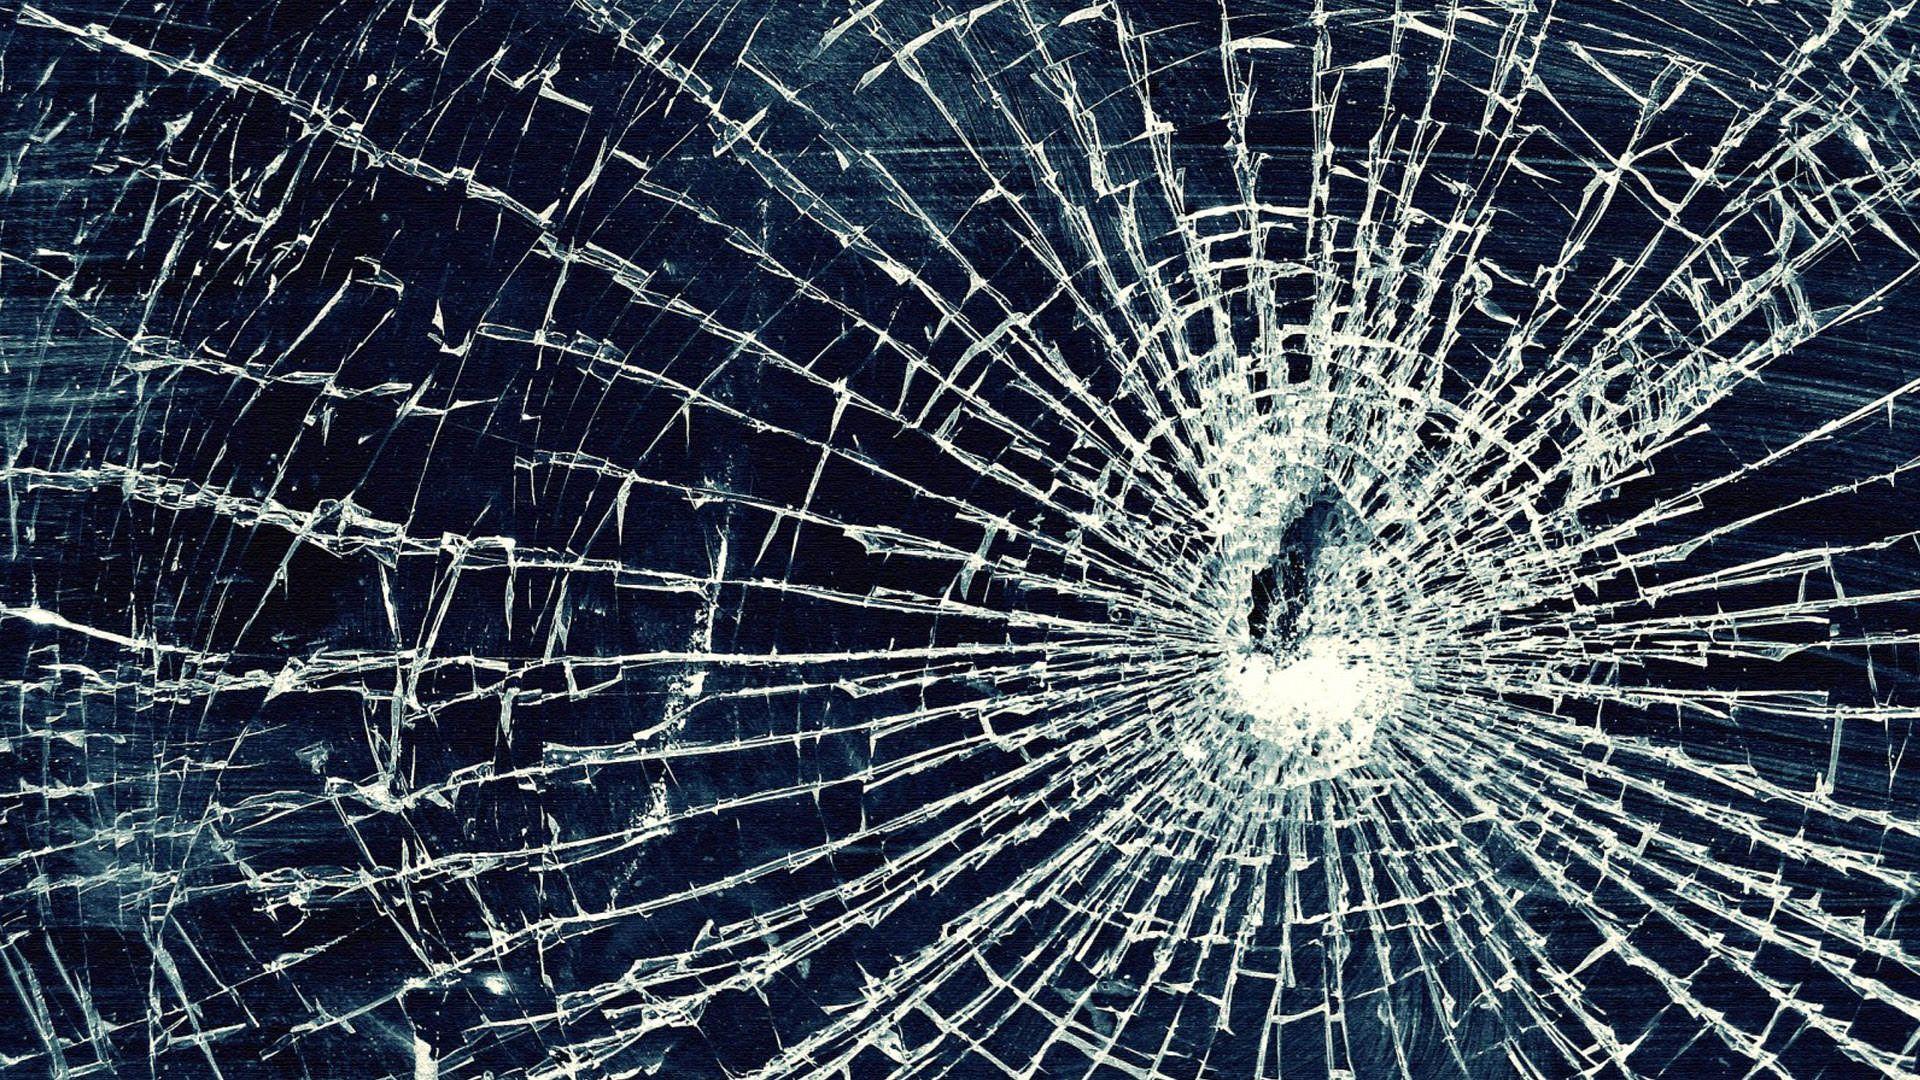 Cracked Screen Wallpaper Free Cracked Screen Background